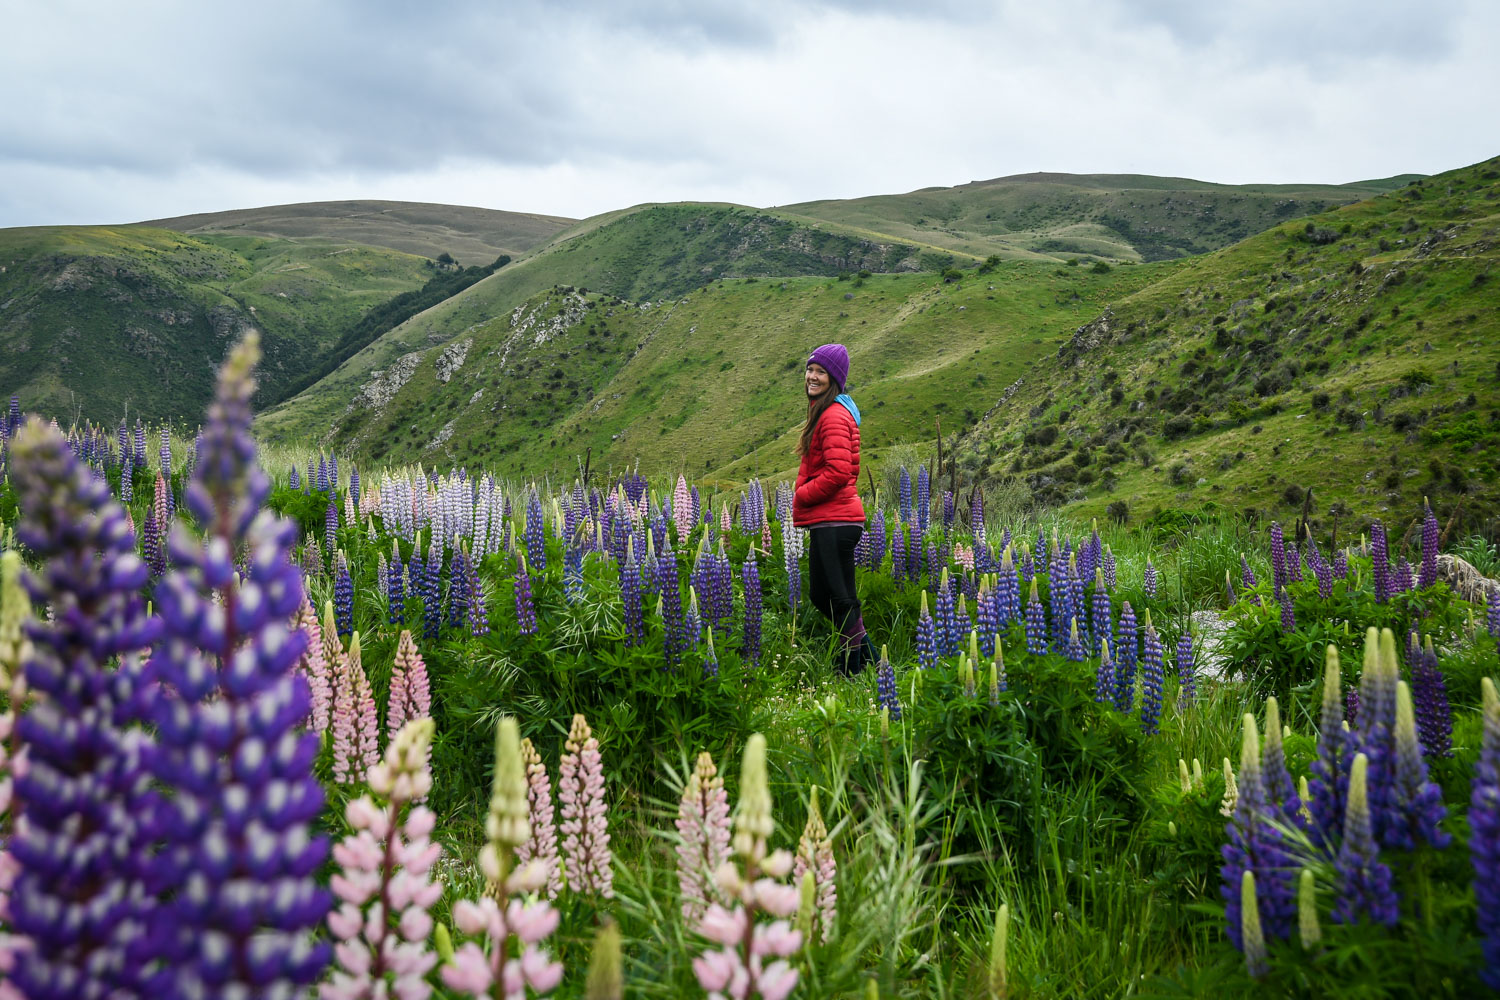 Those lupines might look beautiful, but they’re actually an invasive species!